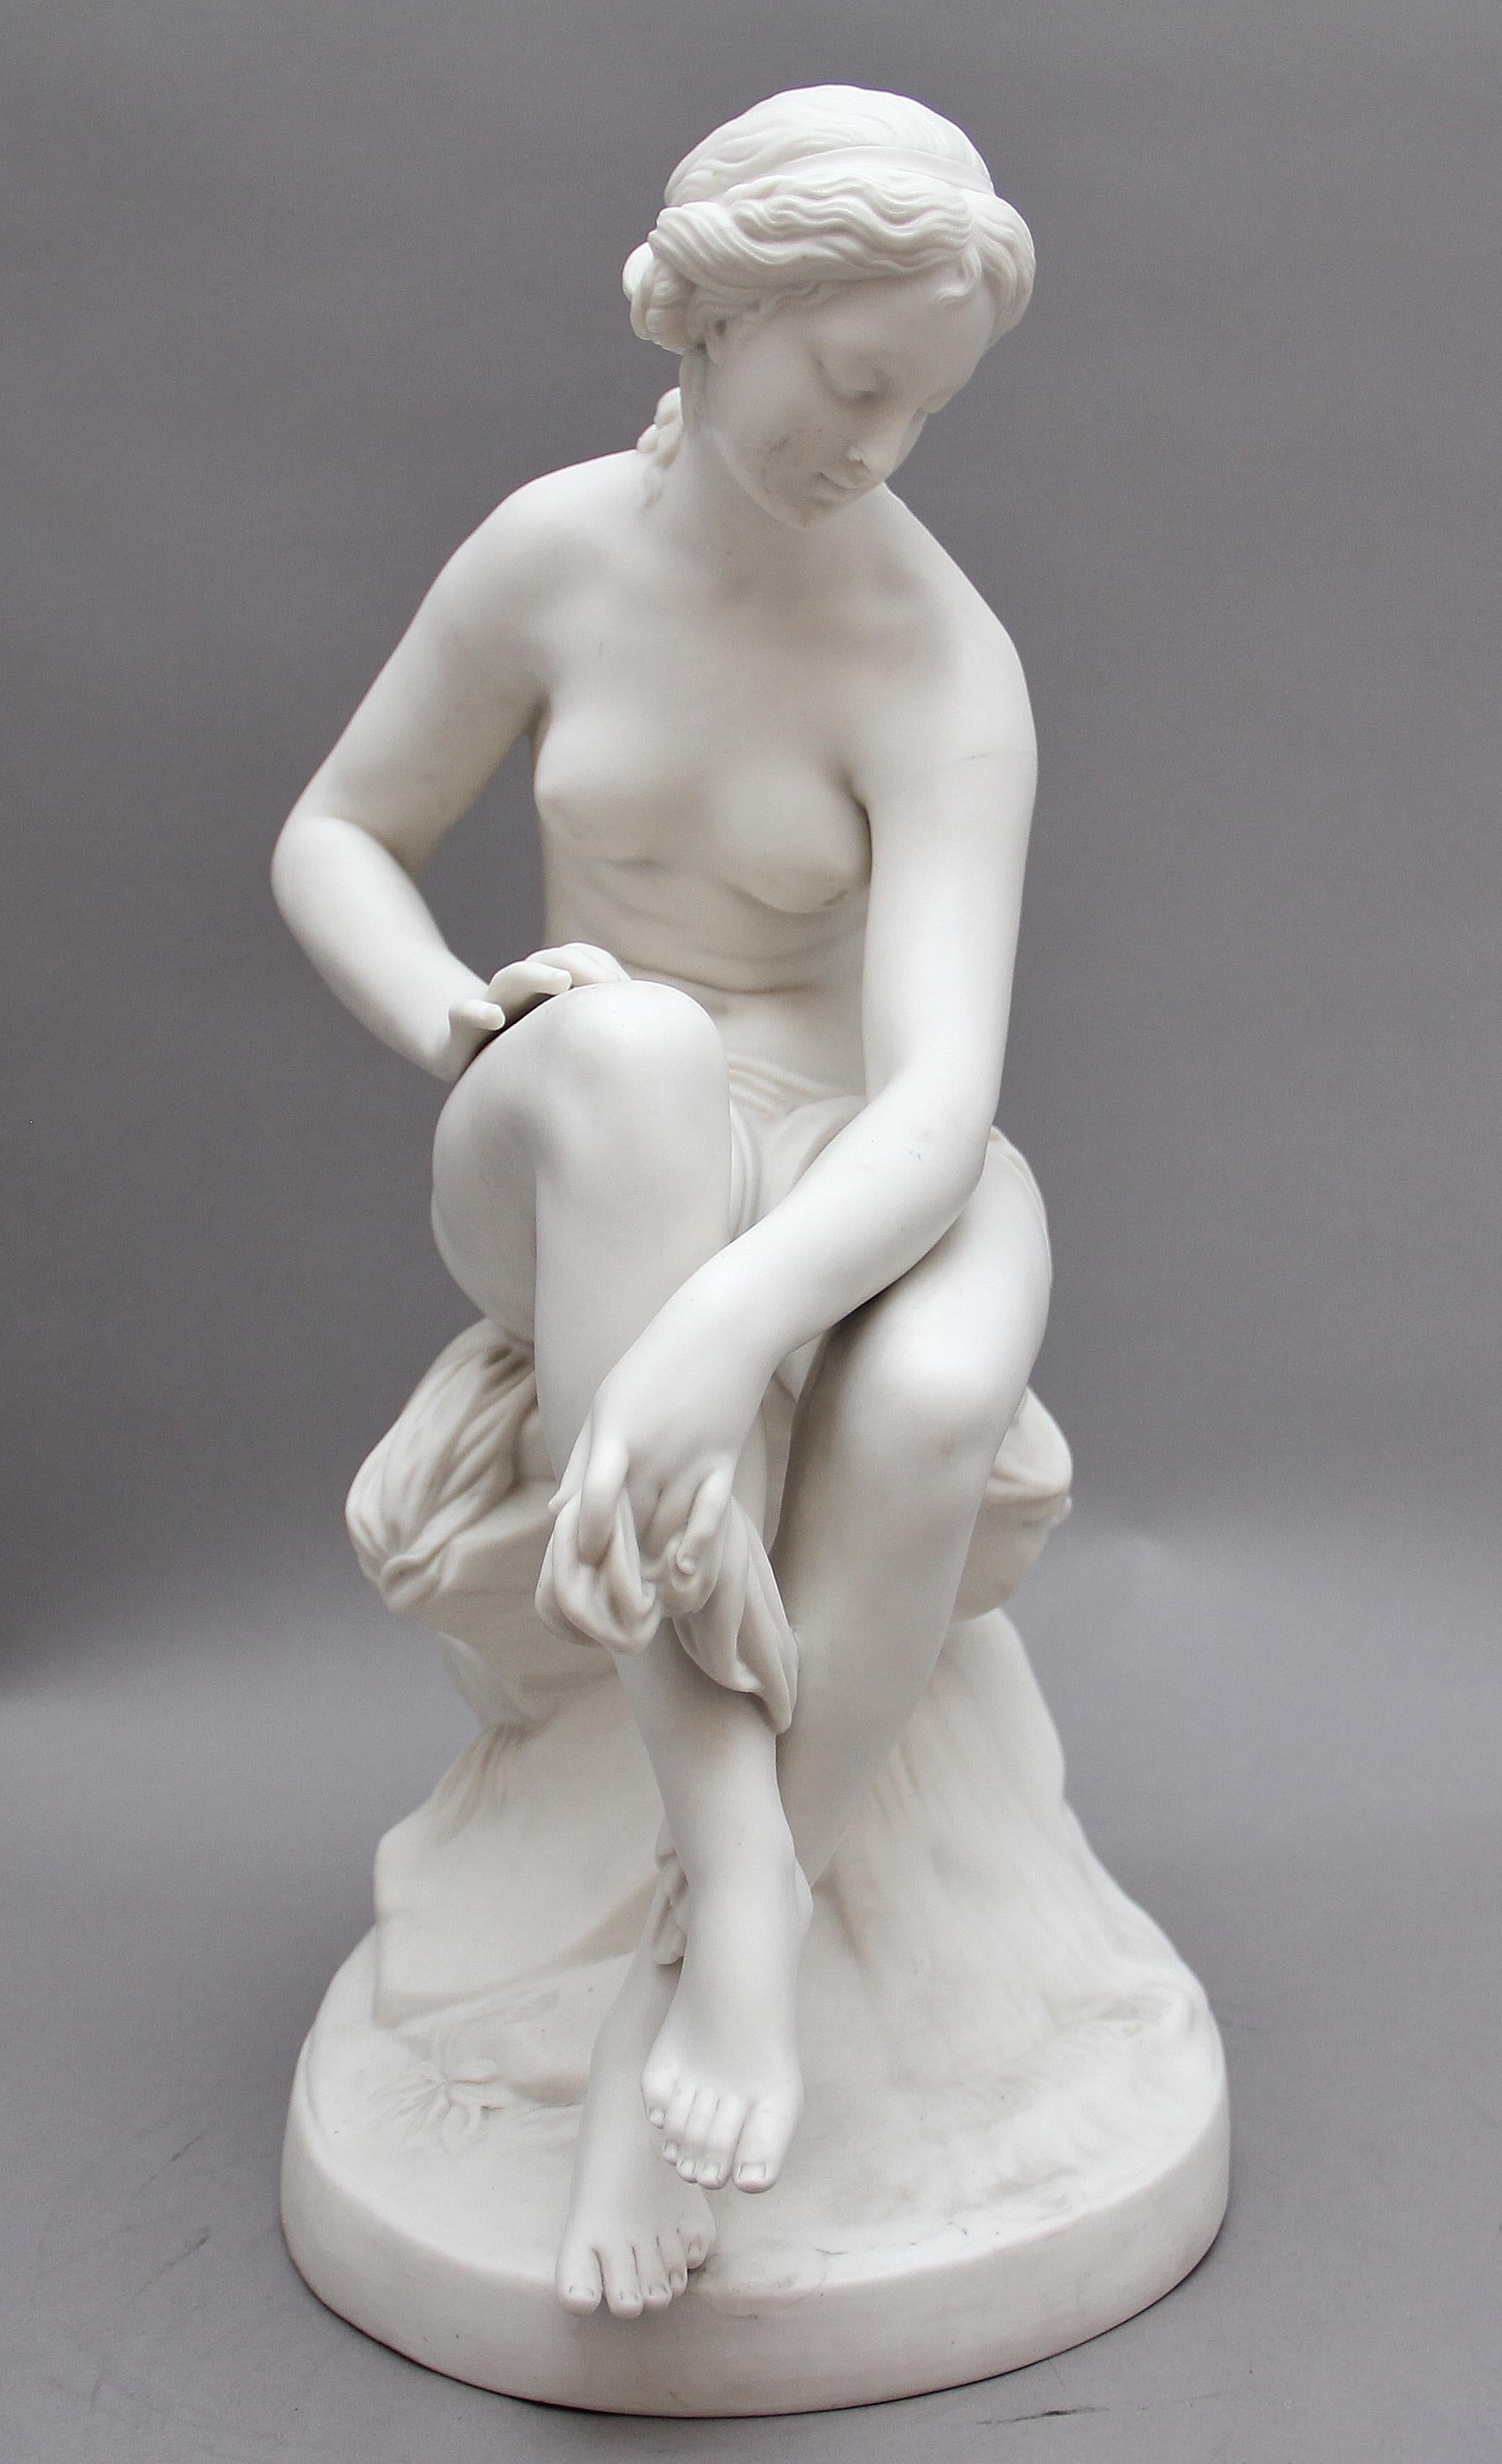 19th century parian figure of a female nude sitting on a blanket on a rock formation. Circa 1850.

 